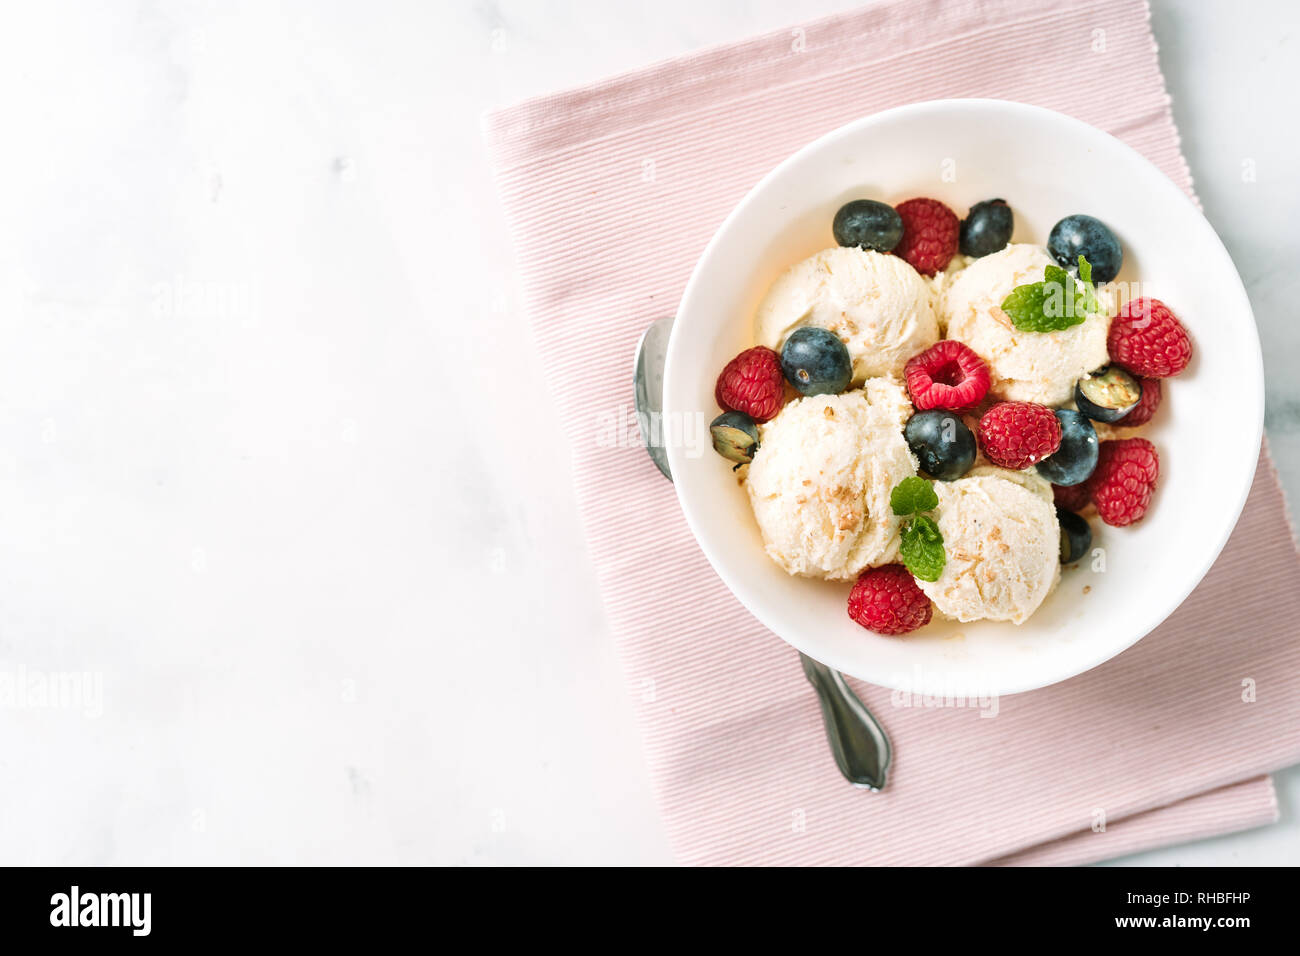 Top view of vanilla ice cream with berries in a bowl on pink serviette Stock Photo